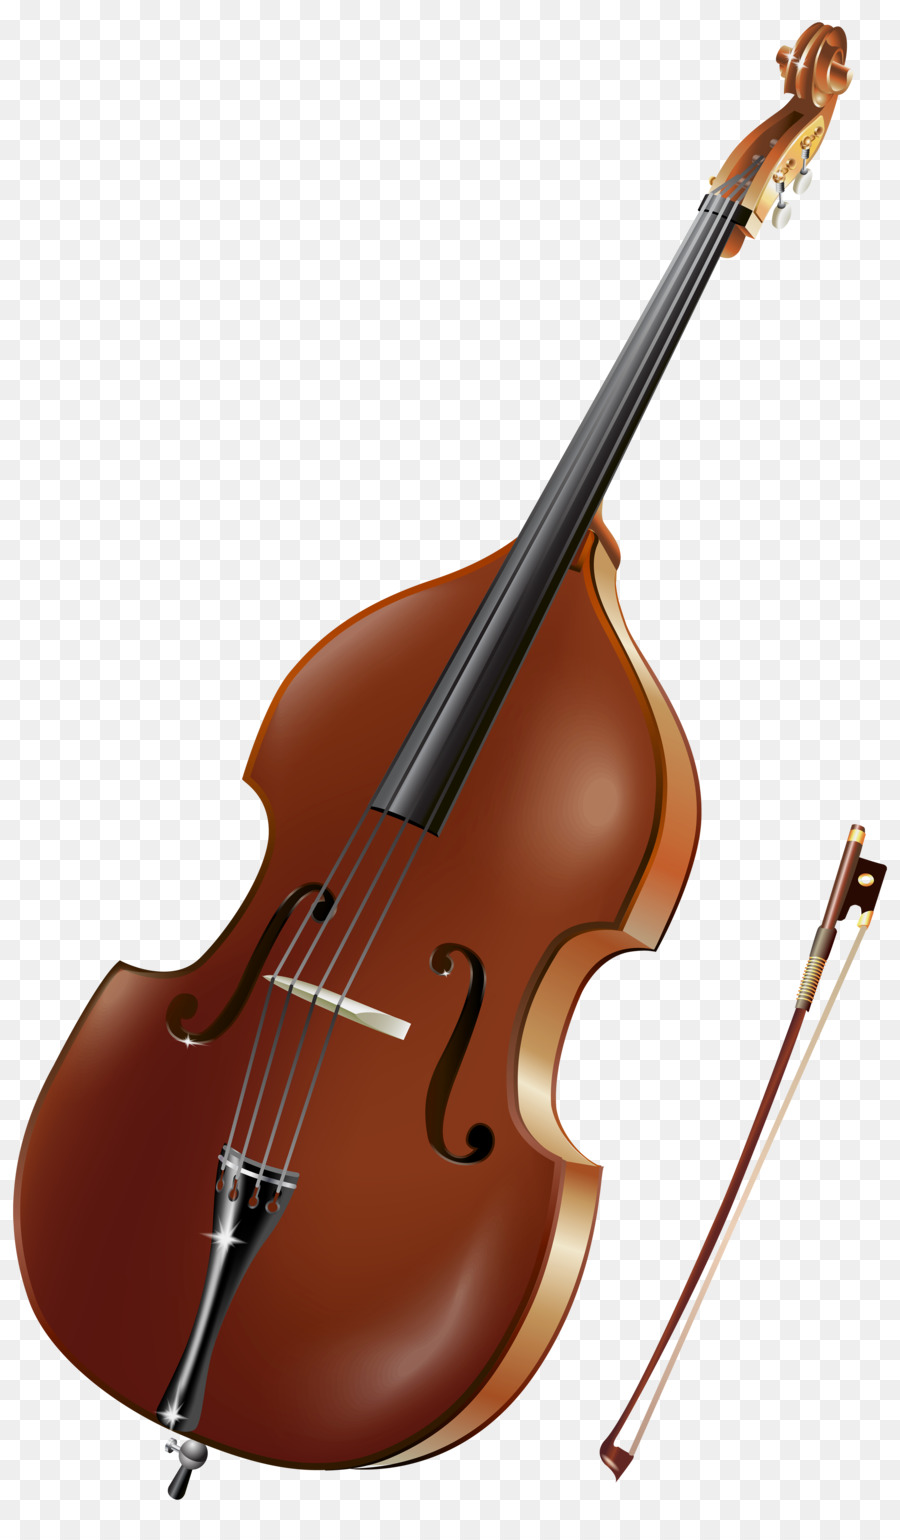 Double bass Violin Musical Instruments Cello Clip art - harp png download - 2957*5000 - Free Transparent  png Download.